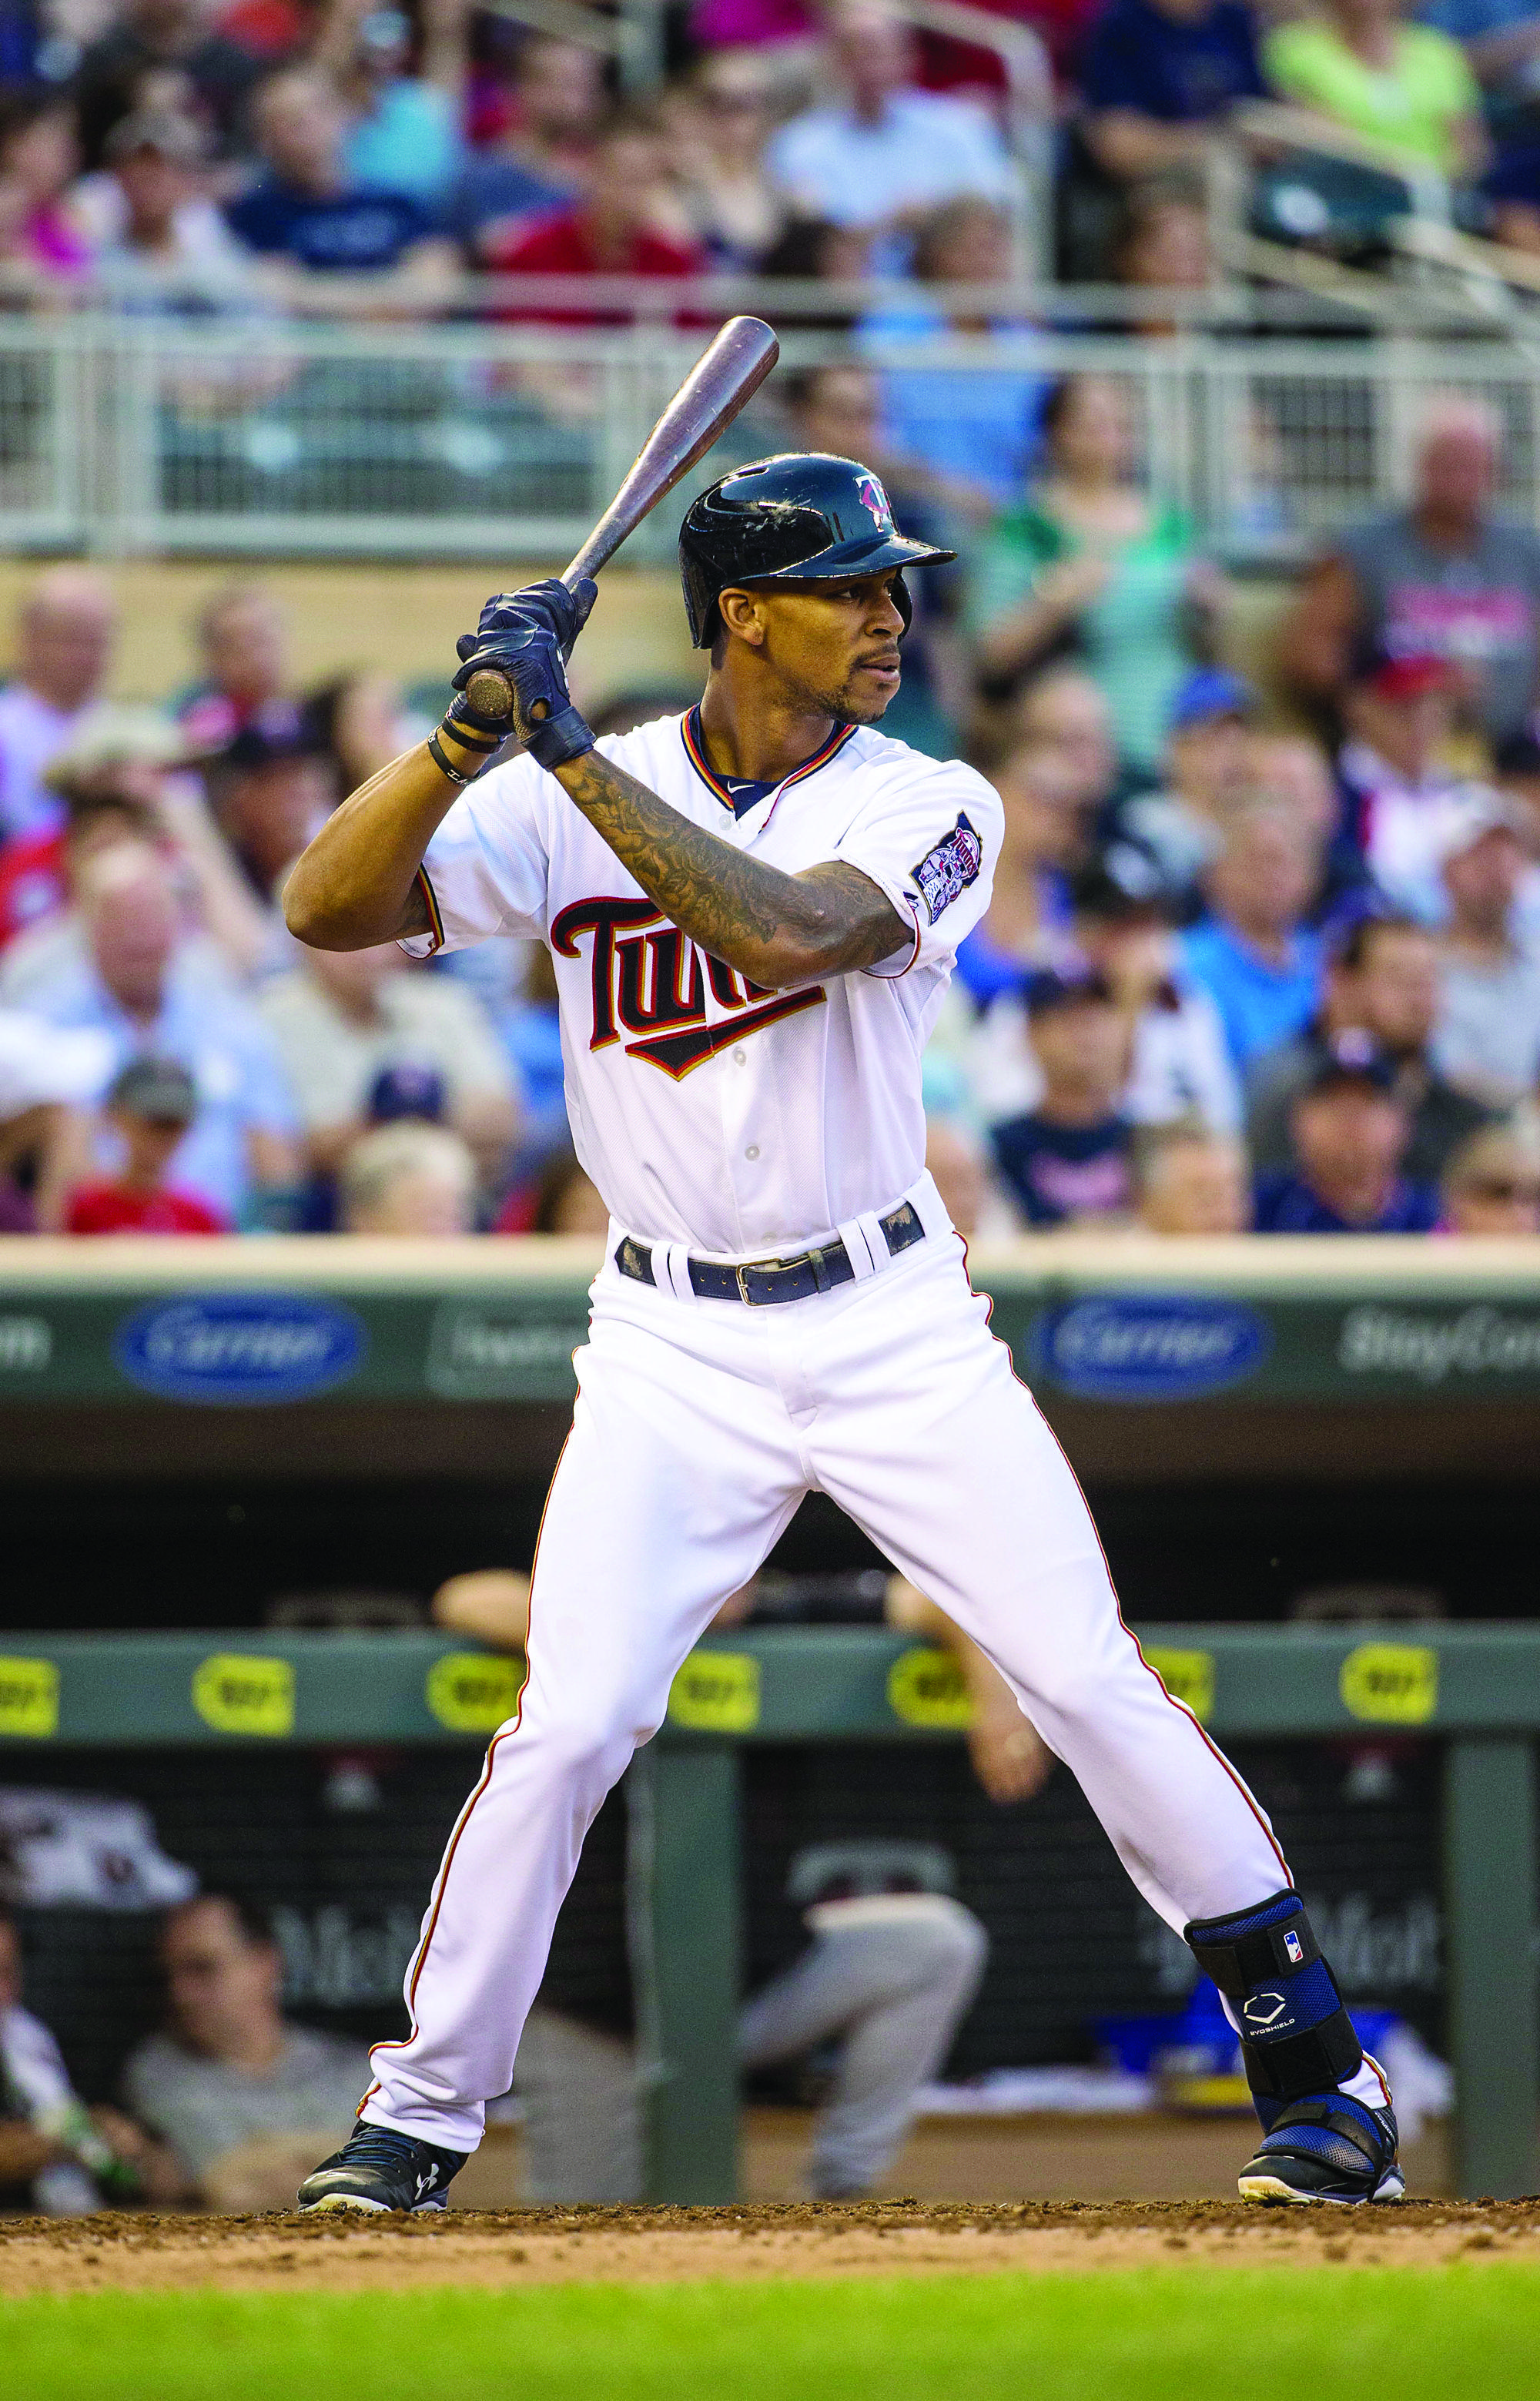 Byron Buxton Wallpapers - Wallpaper Cave